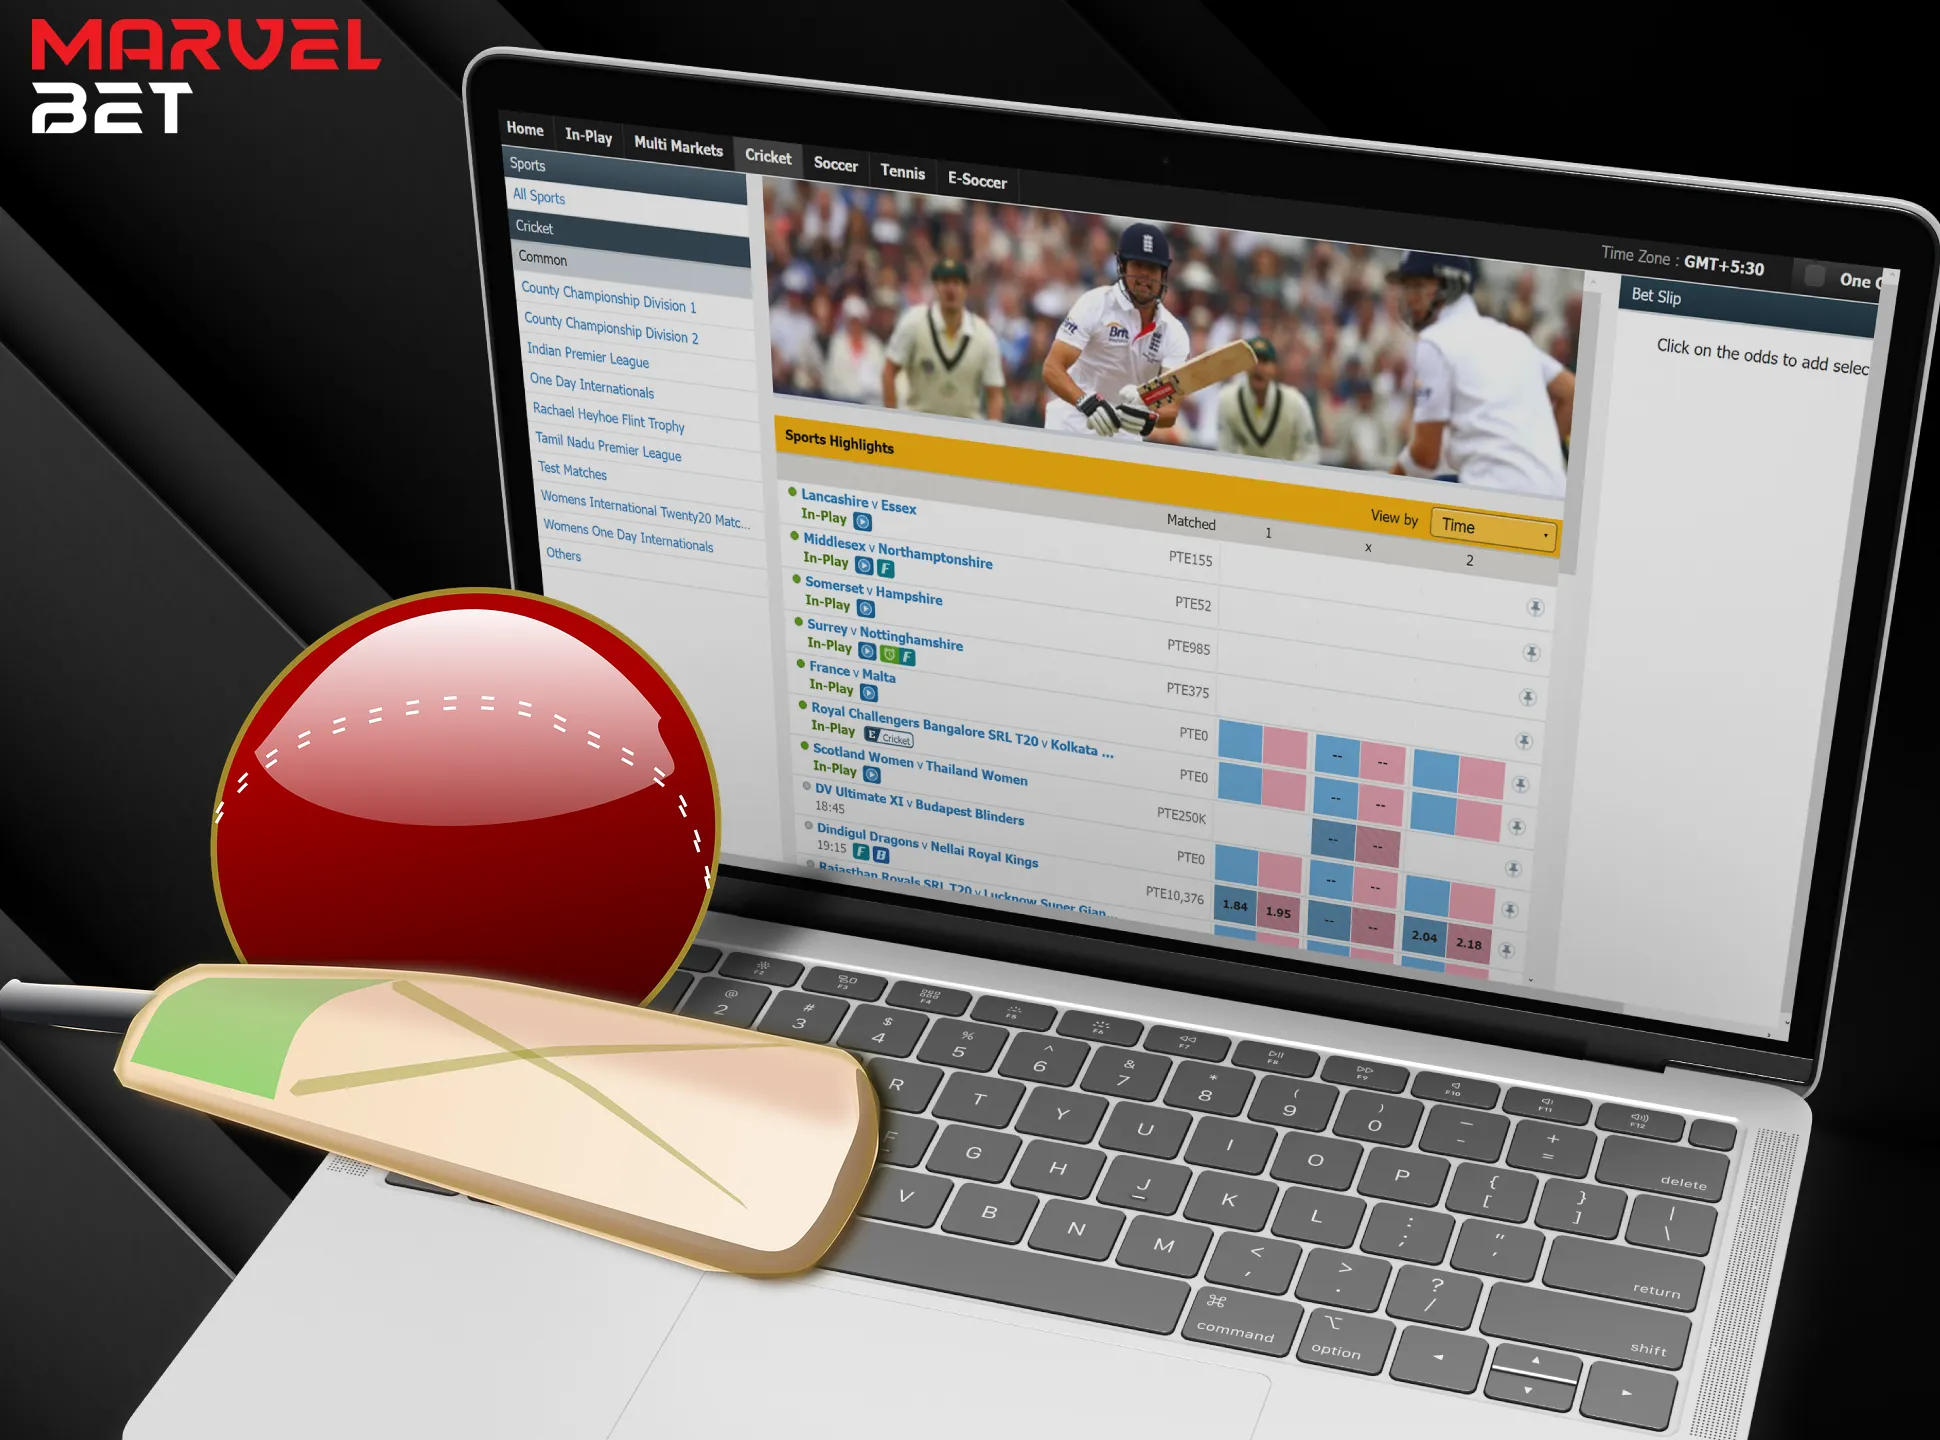 With Marvelbet, bet on any cricket competition.